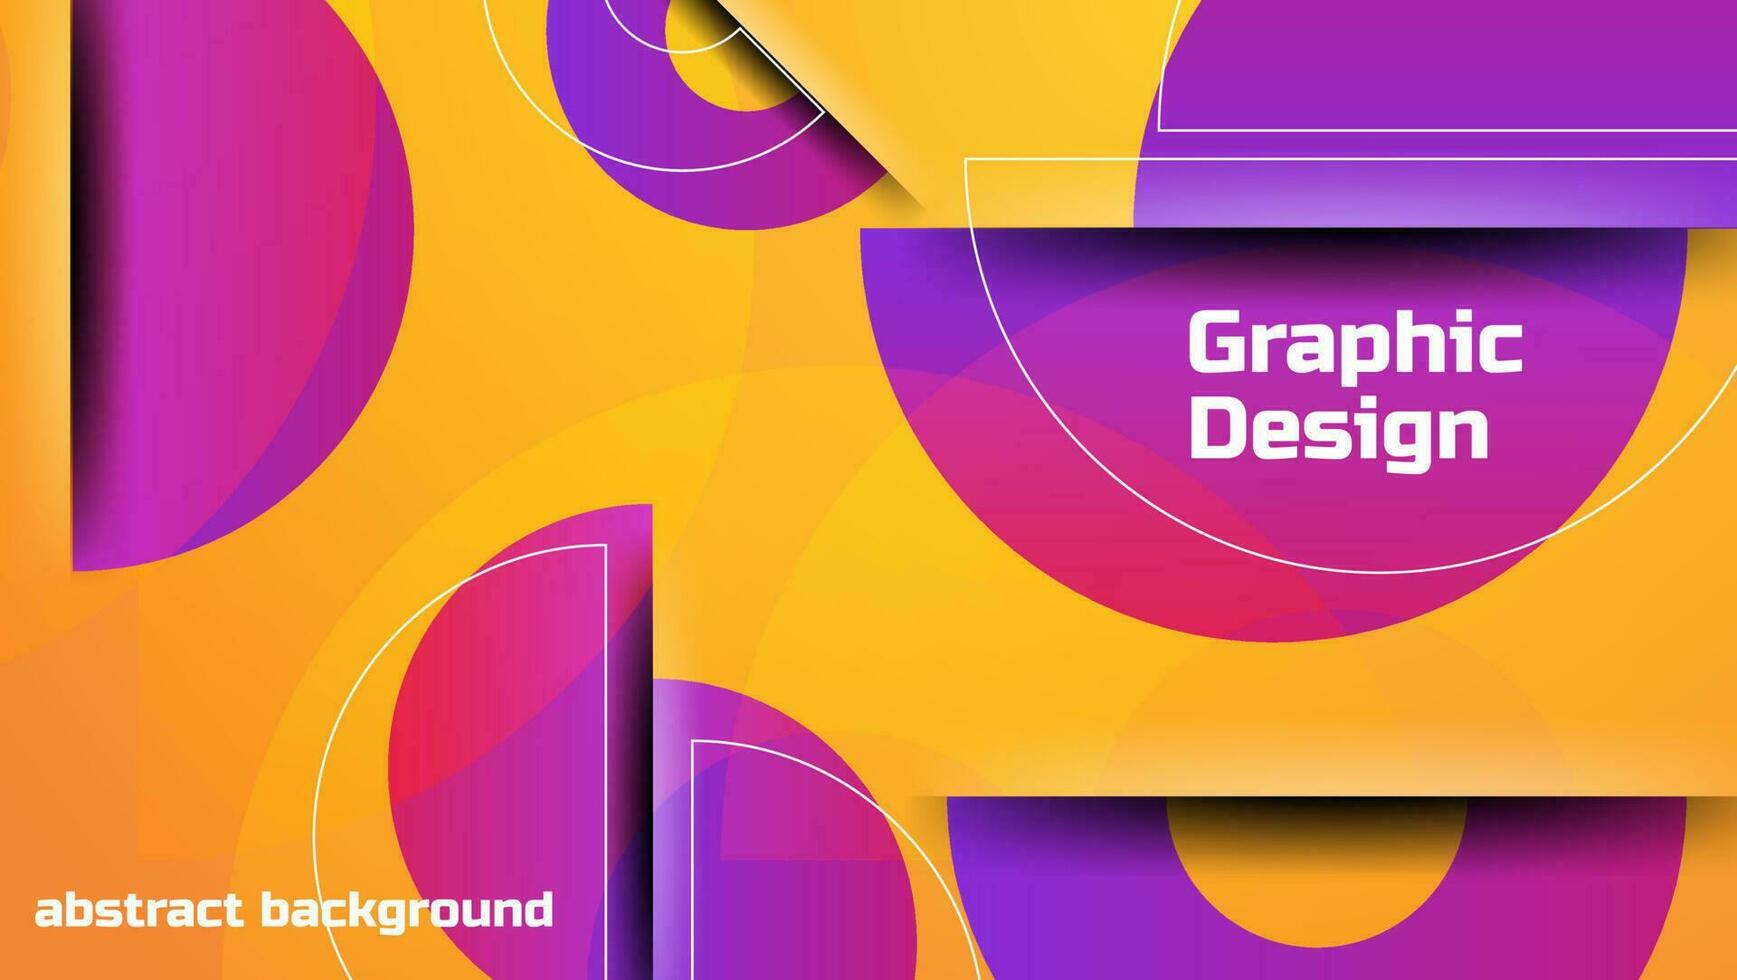 abstract purple gradient background with geometric shapes composition.vector illustration vector